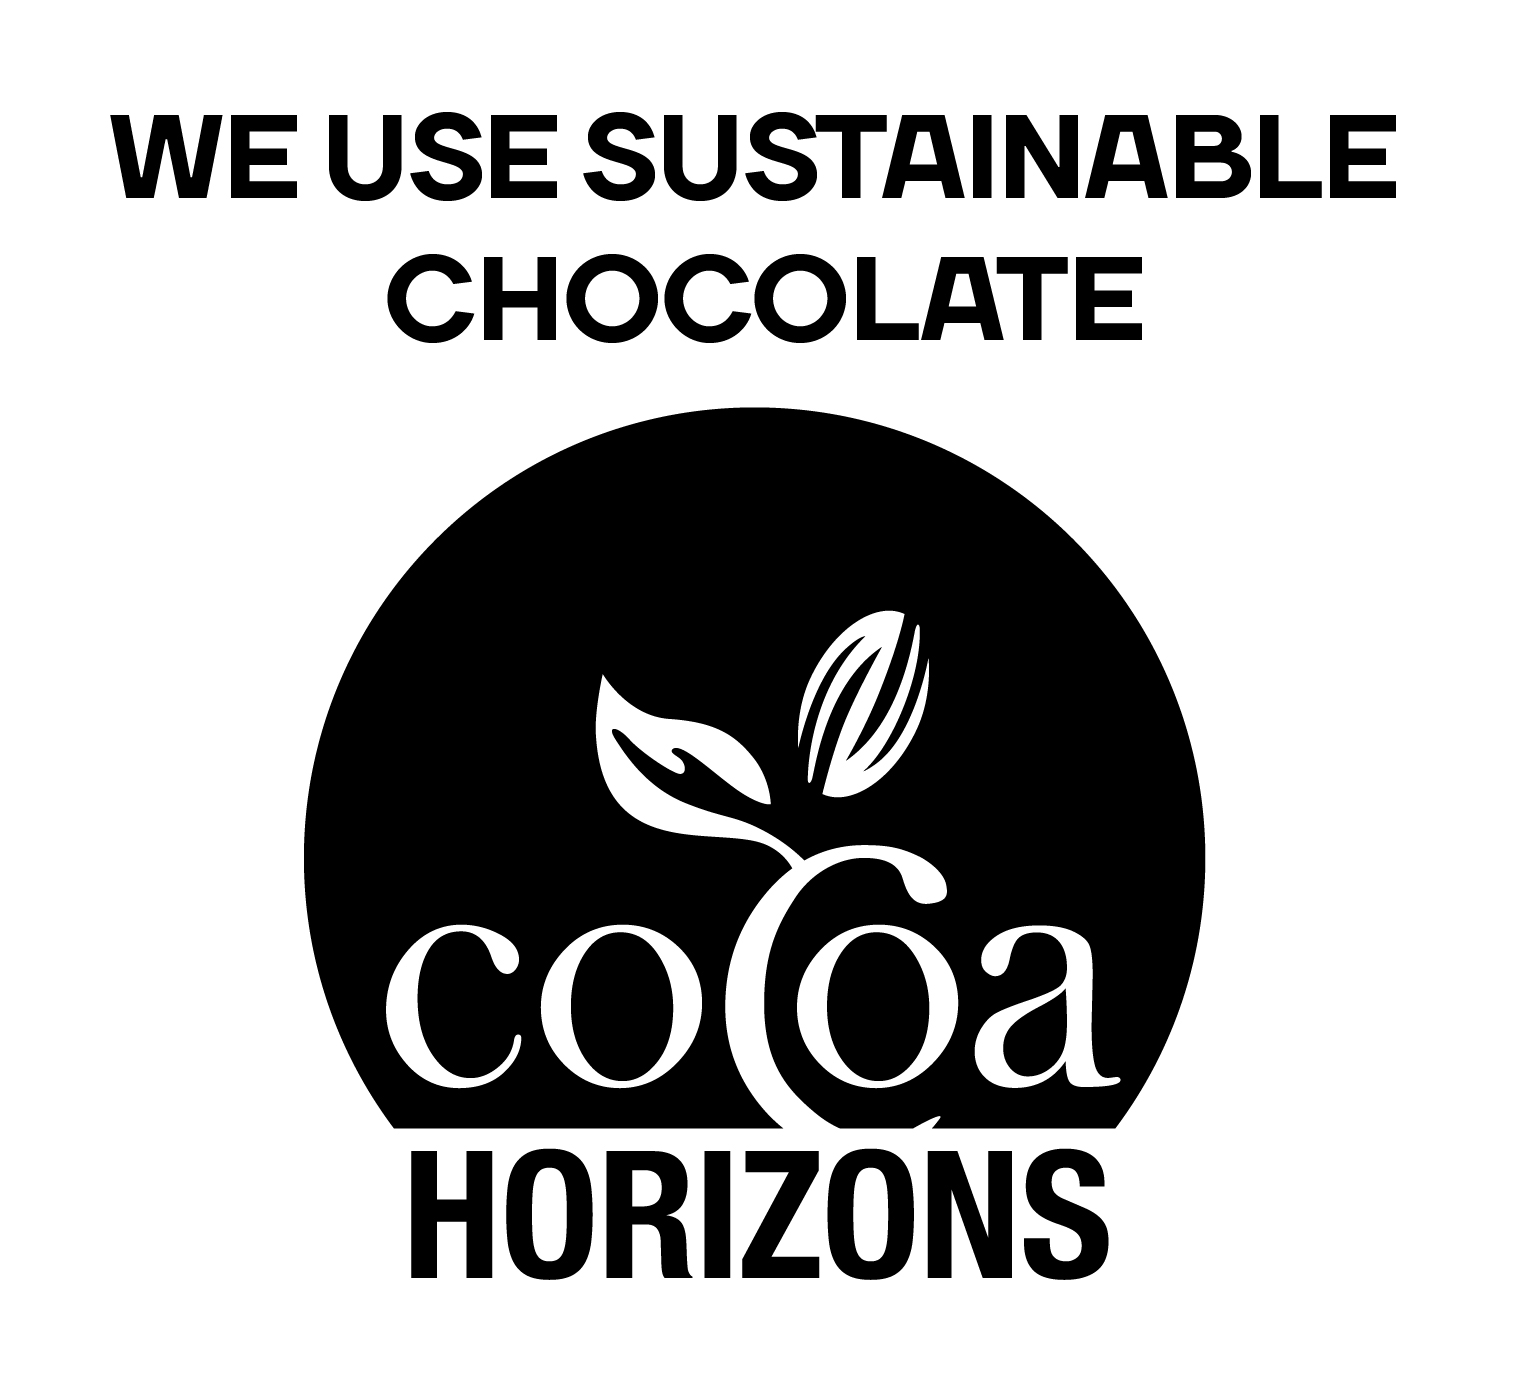 Where our Chocolate Comes From